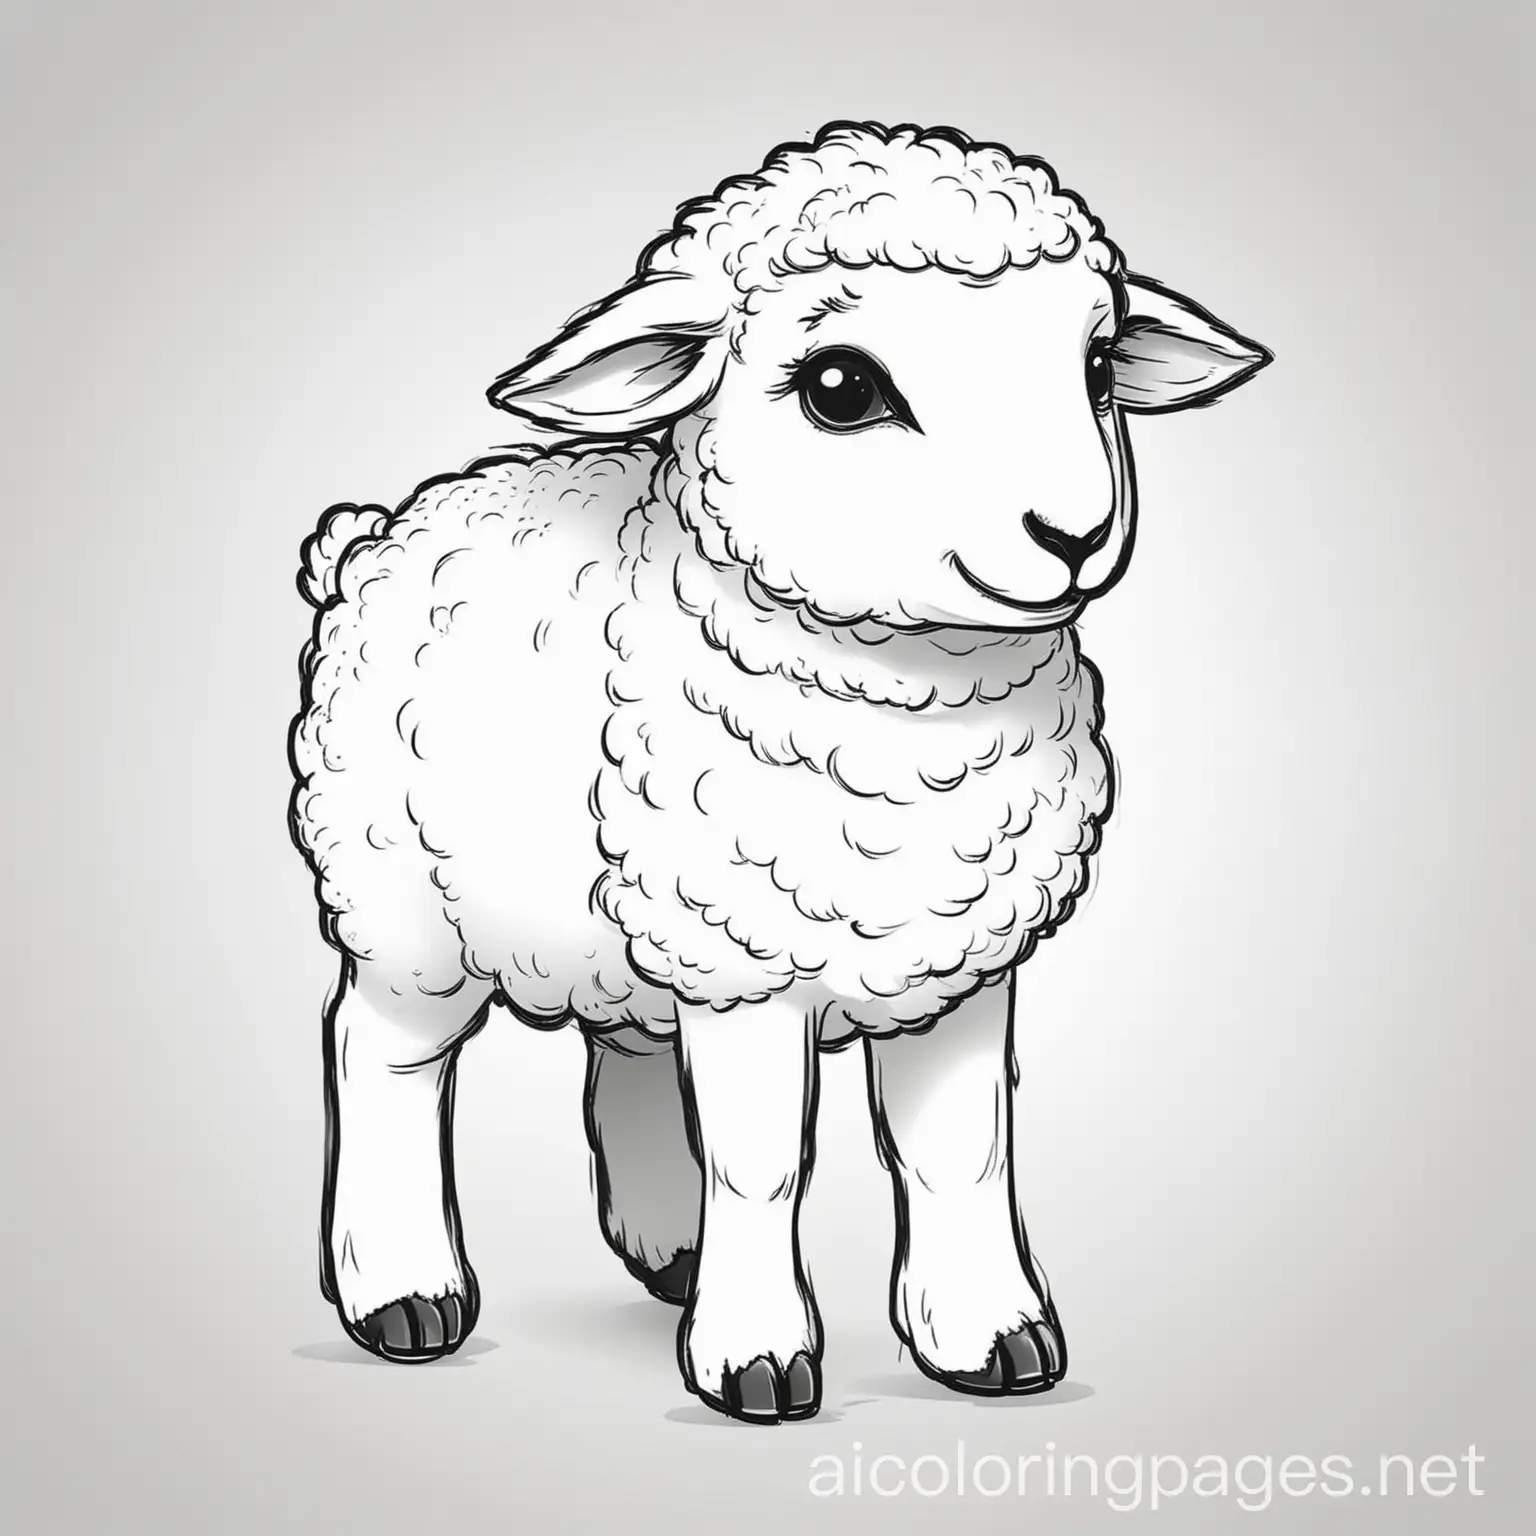 Adorable-Baby-Sheep-Coloring-Page-Simple-Line-Art-on-White-Background